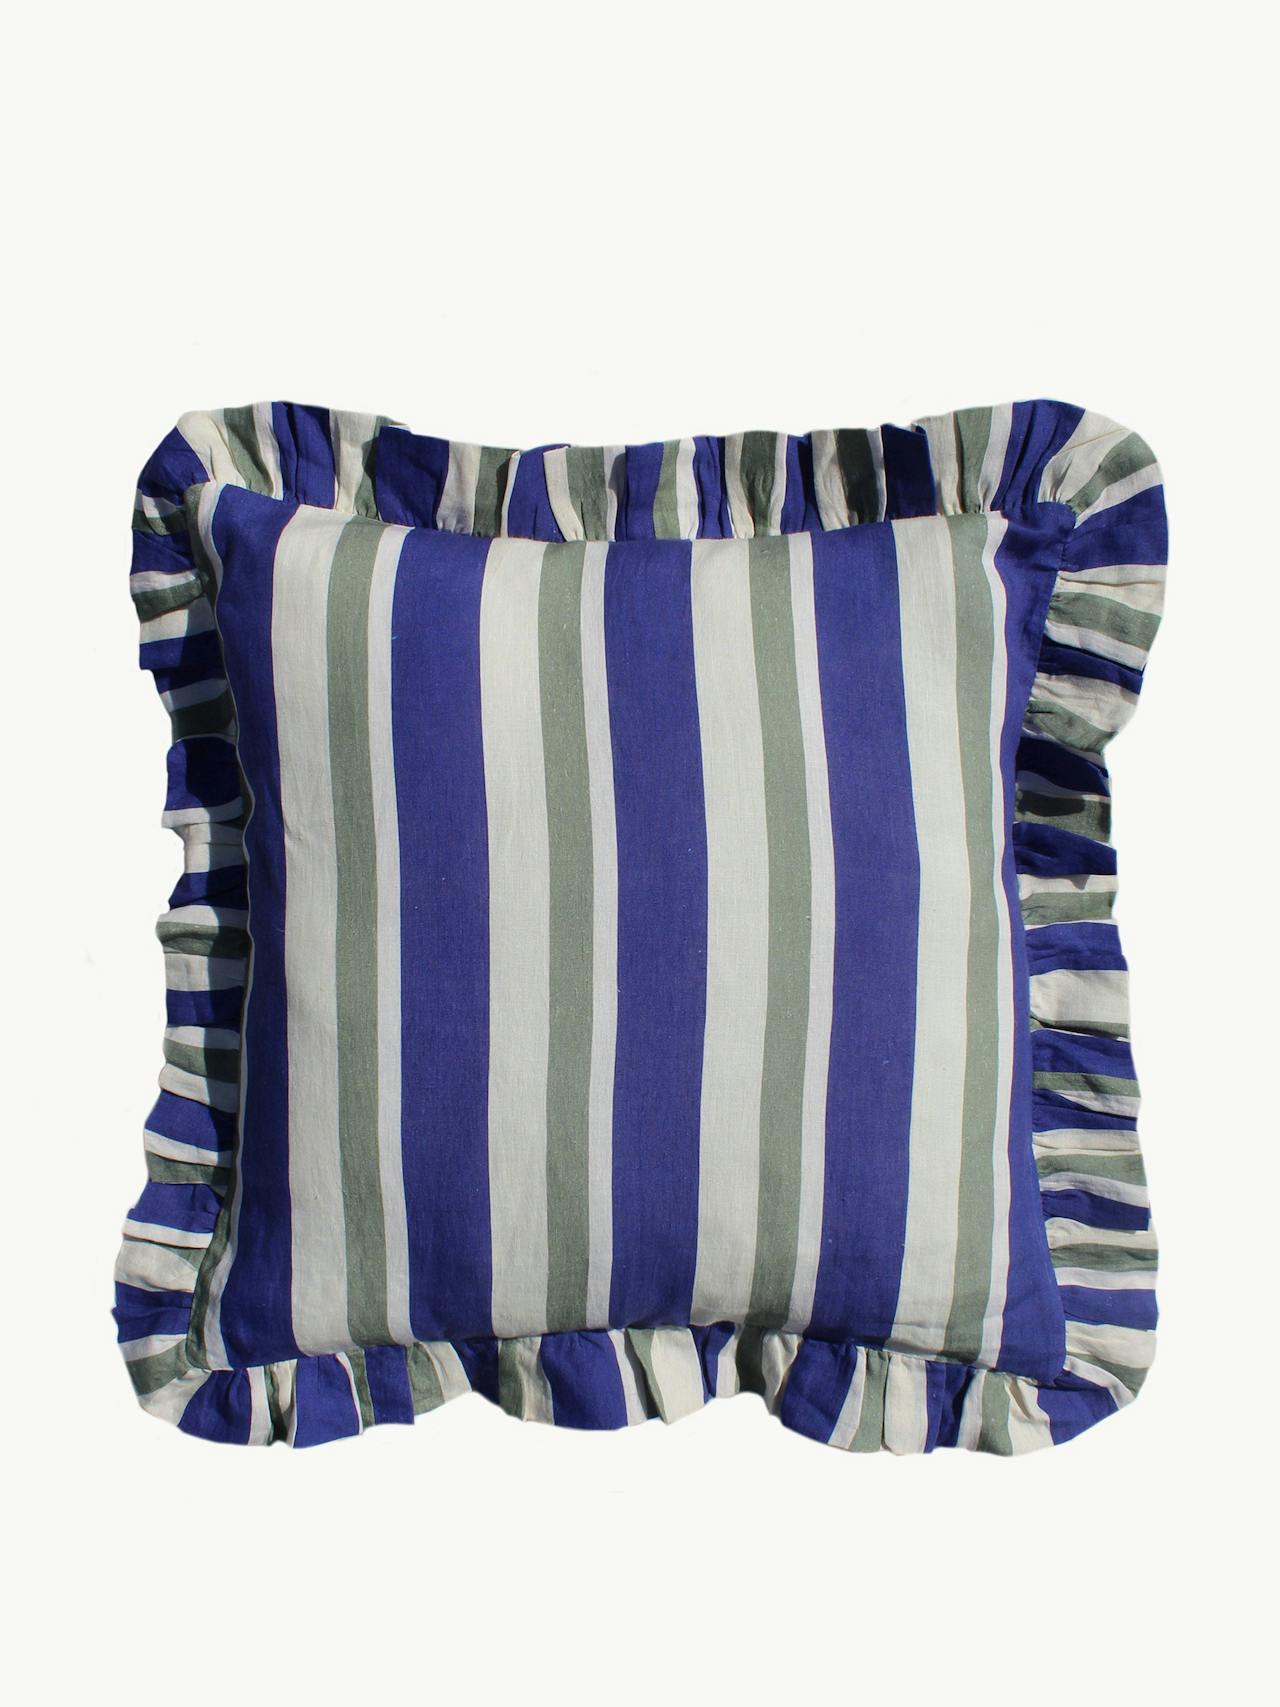 Cobalt and sea green large cushion cover